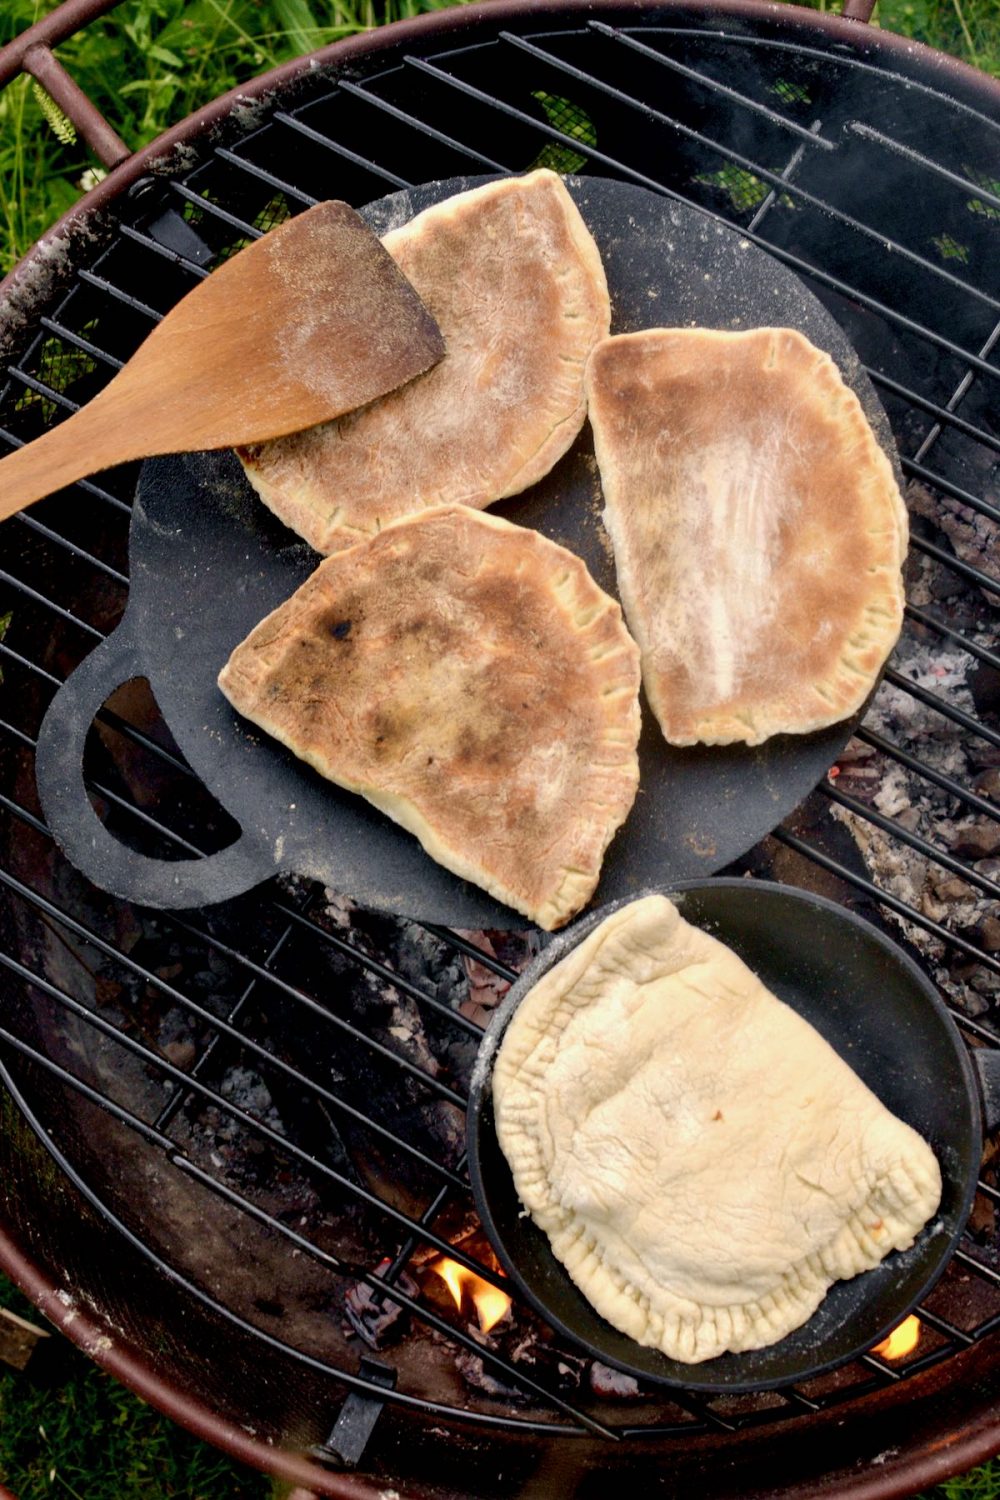 Three calzone have been turned over on the cooking stone and show a brown crunchy crust.